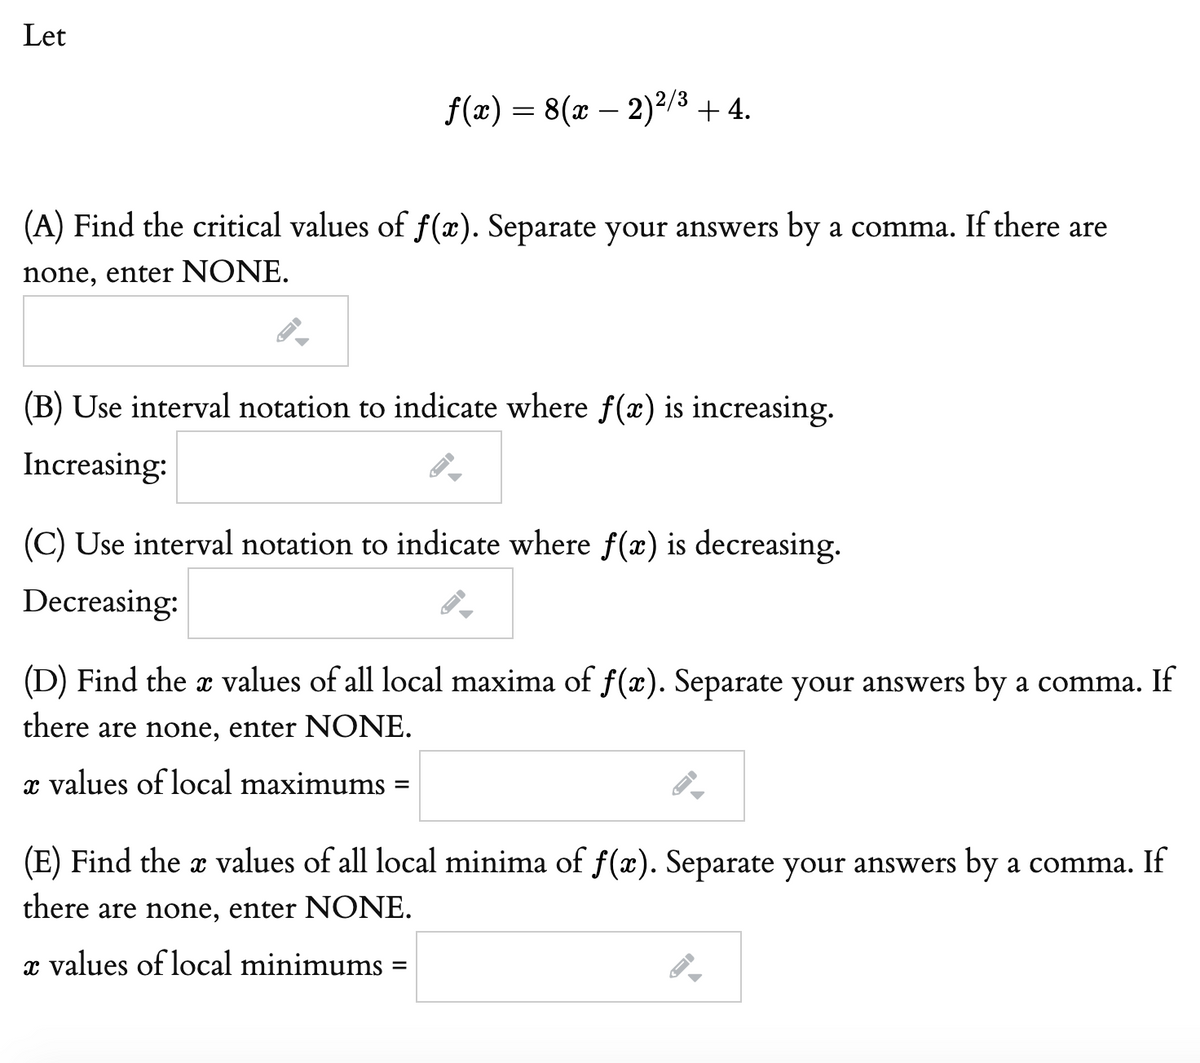 Let
f(x) = 8(x – 2)²/3 + 4.
(A) Find the critical values of f(x). Separate your answers by a comma. If there are
none, enter NONE.
(B) Use interval notation to indicate where f(æ) is increasing.
Increasing:
(C) Use interval notation to indicate where f(x) is decreasing.
Decreasing:
(D) Find the x values of all local maxima of f(x). Separate your answers by a comma. If
there are none, enter NONE.
x values of local maximums =
(E) Find the x values of all local minima of f(x). Separate your answers by a comma. If
there are none, enter NONE.
x values of local minimums
